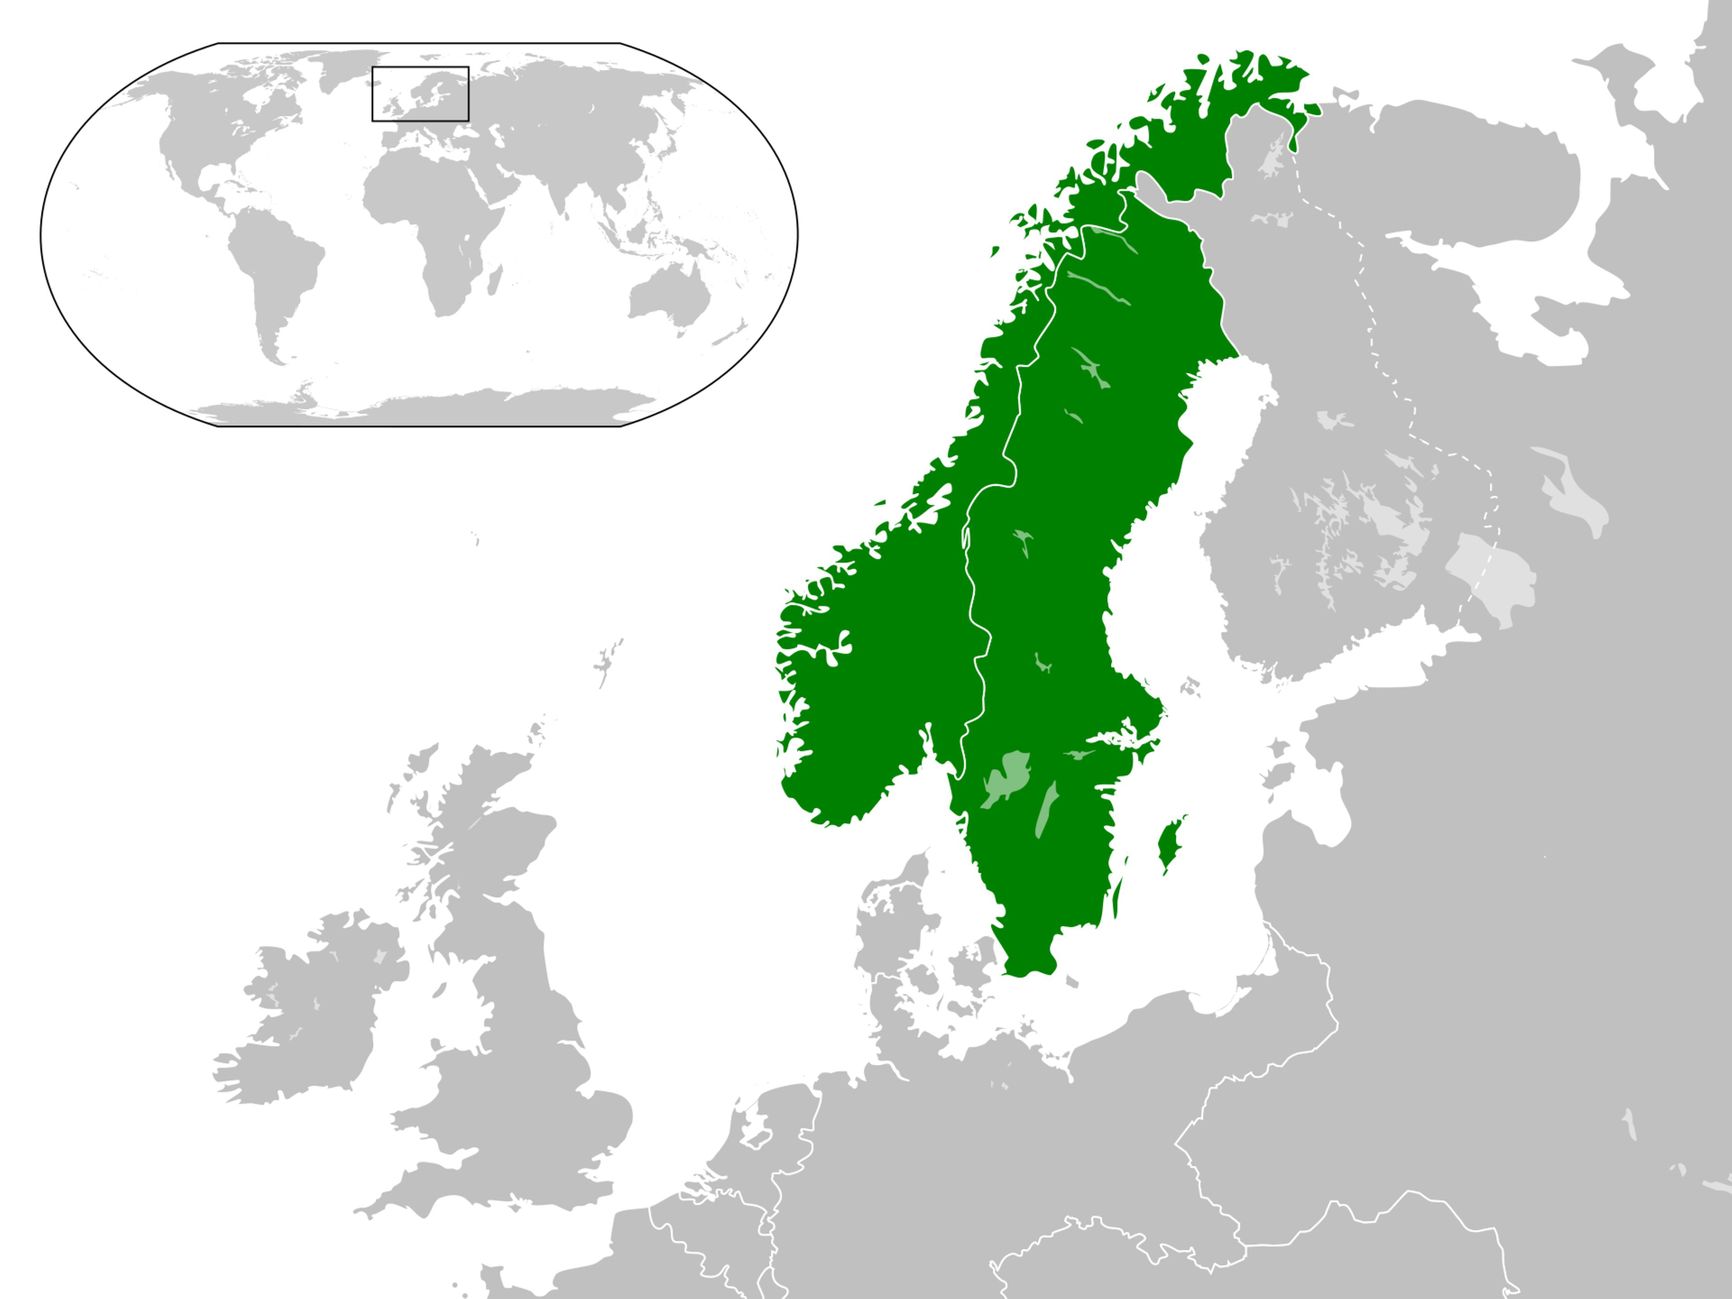 Map of Sweden and Norway in 1814-1905